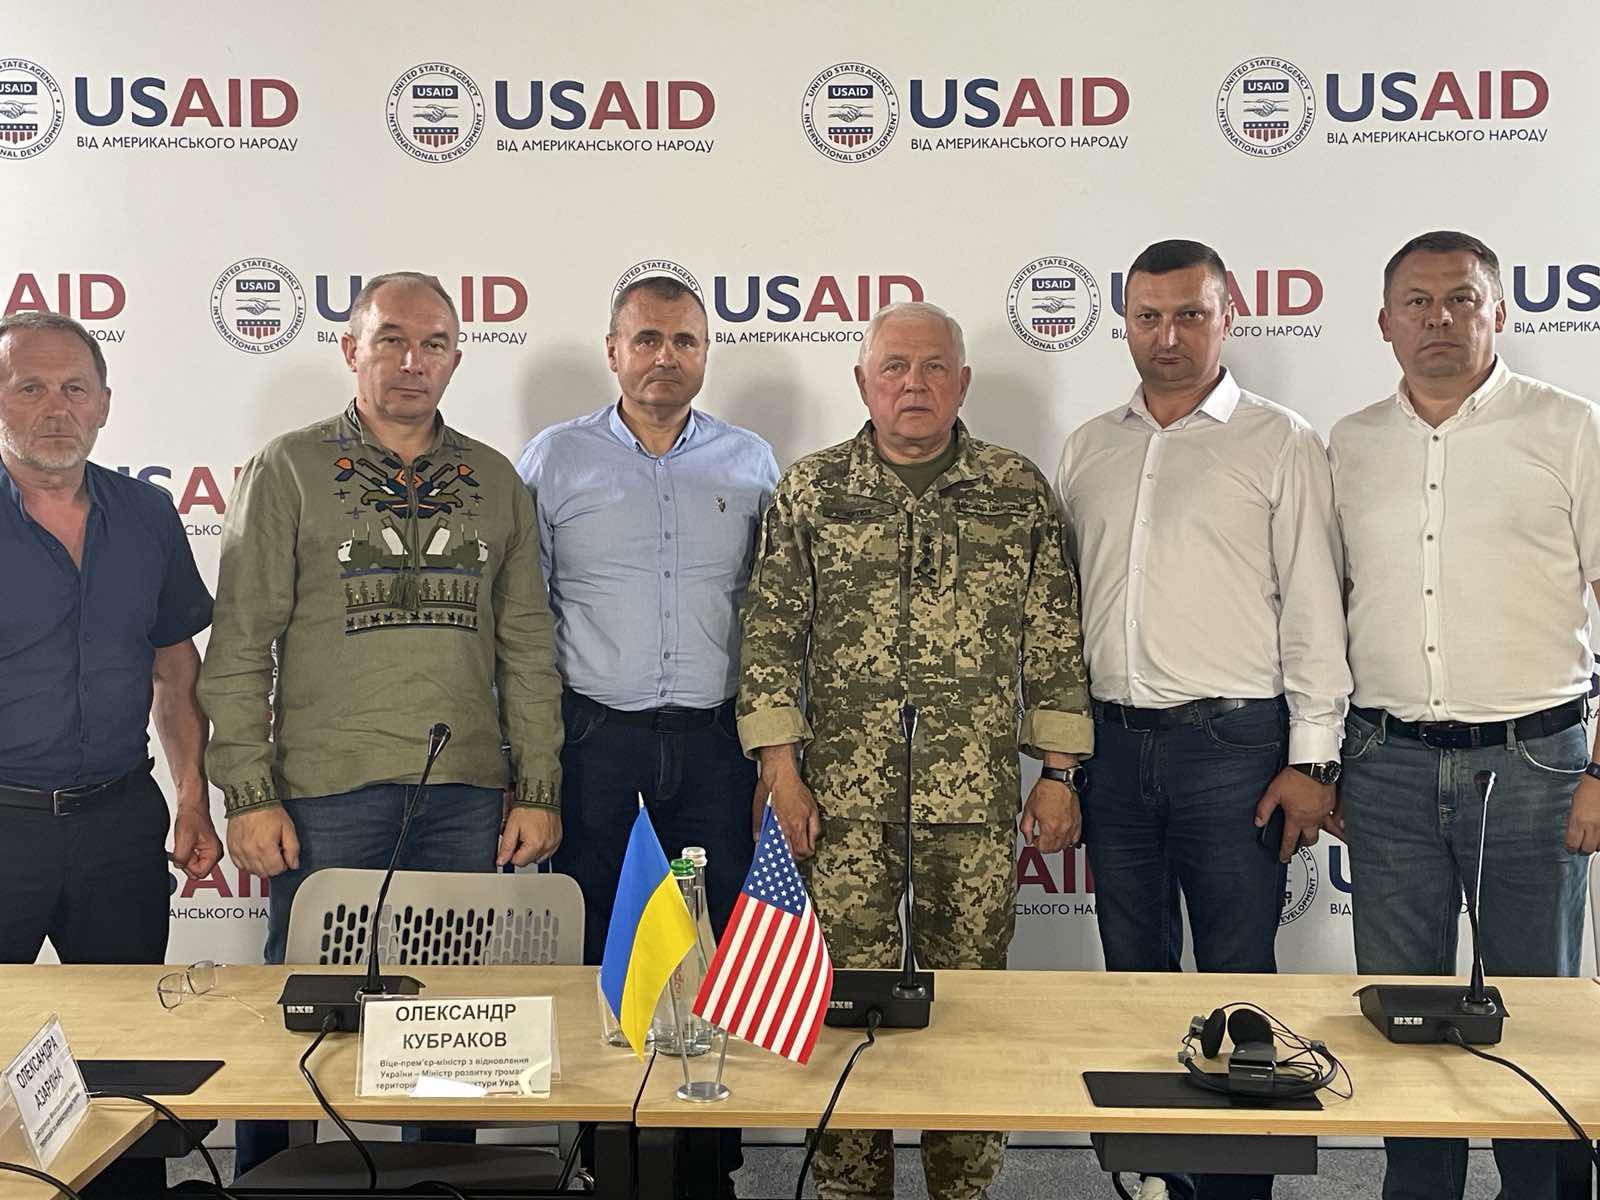 Community leader at the press conference of the USAID HOVERLA Project